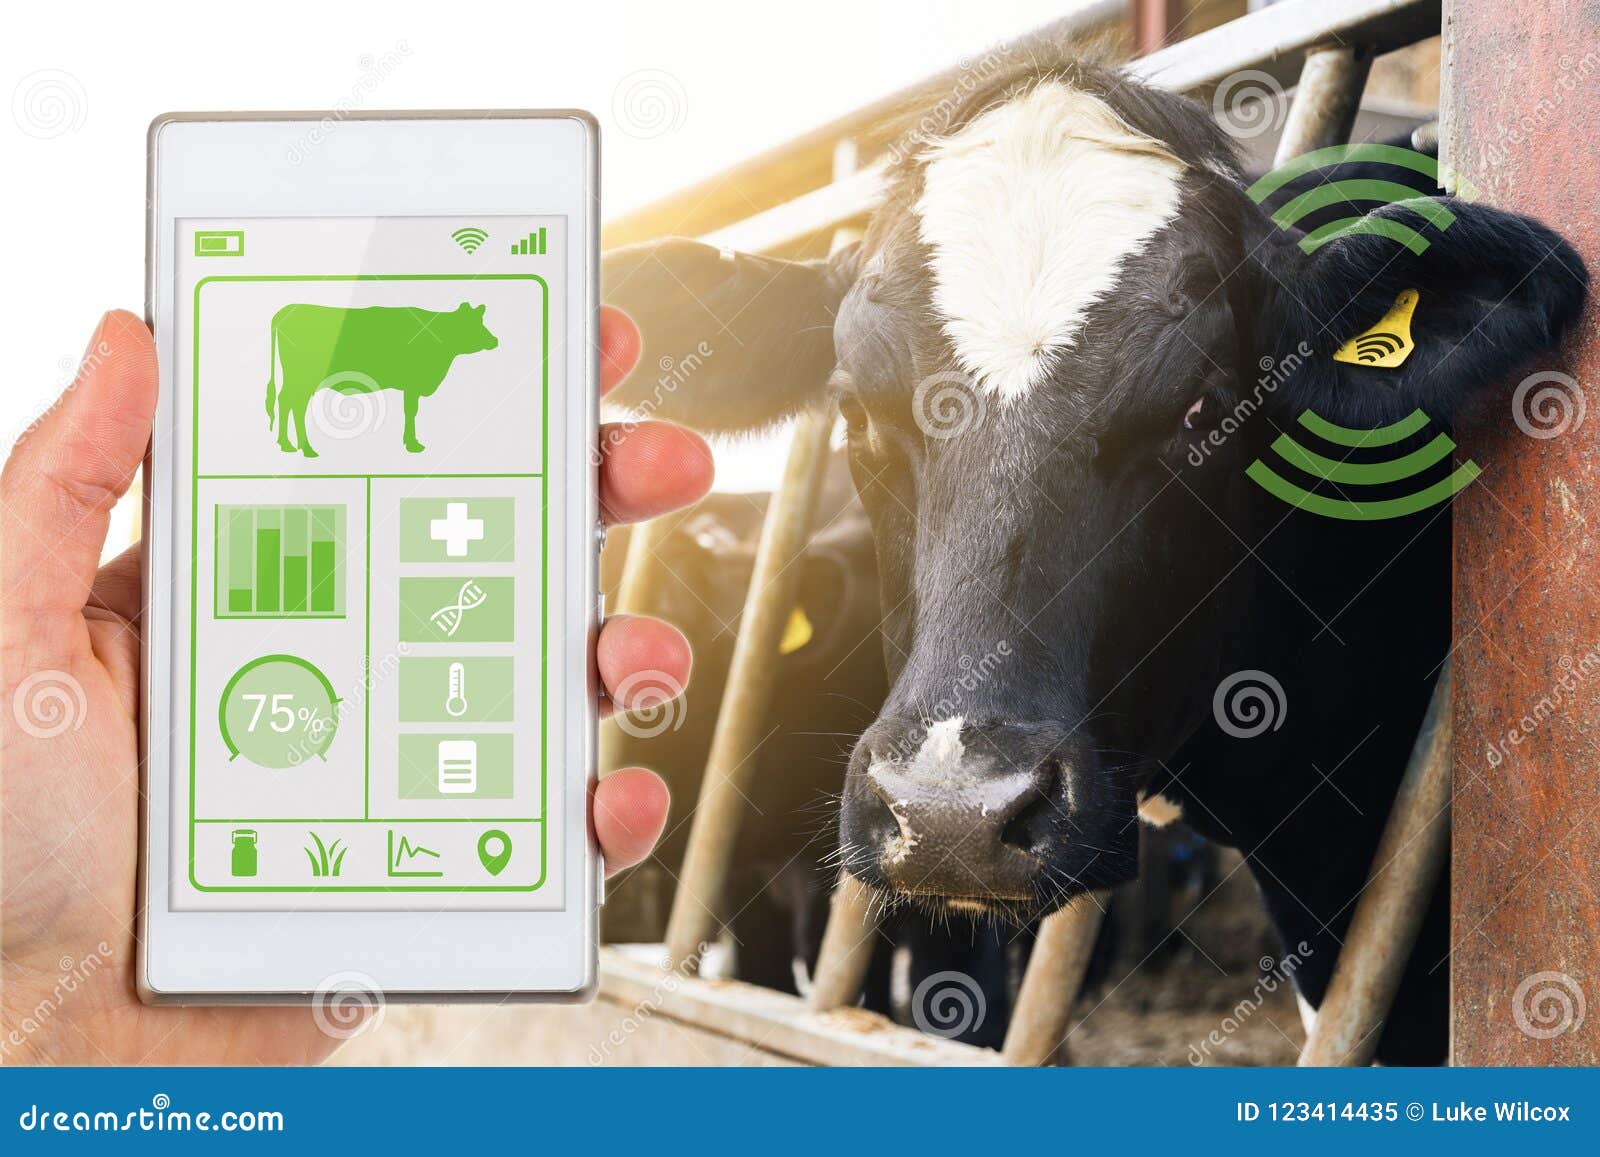 smartphone app reading dairy cows data tag agritech concept